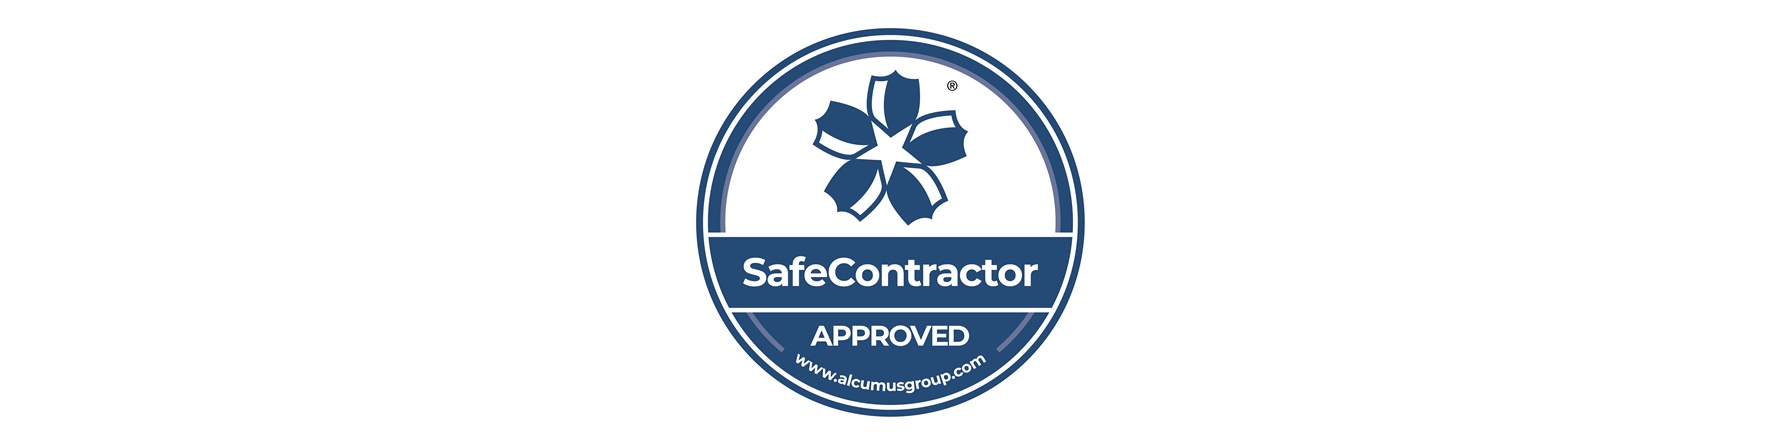 Centrateq Awarded Top Safety Accreditation